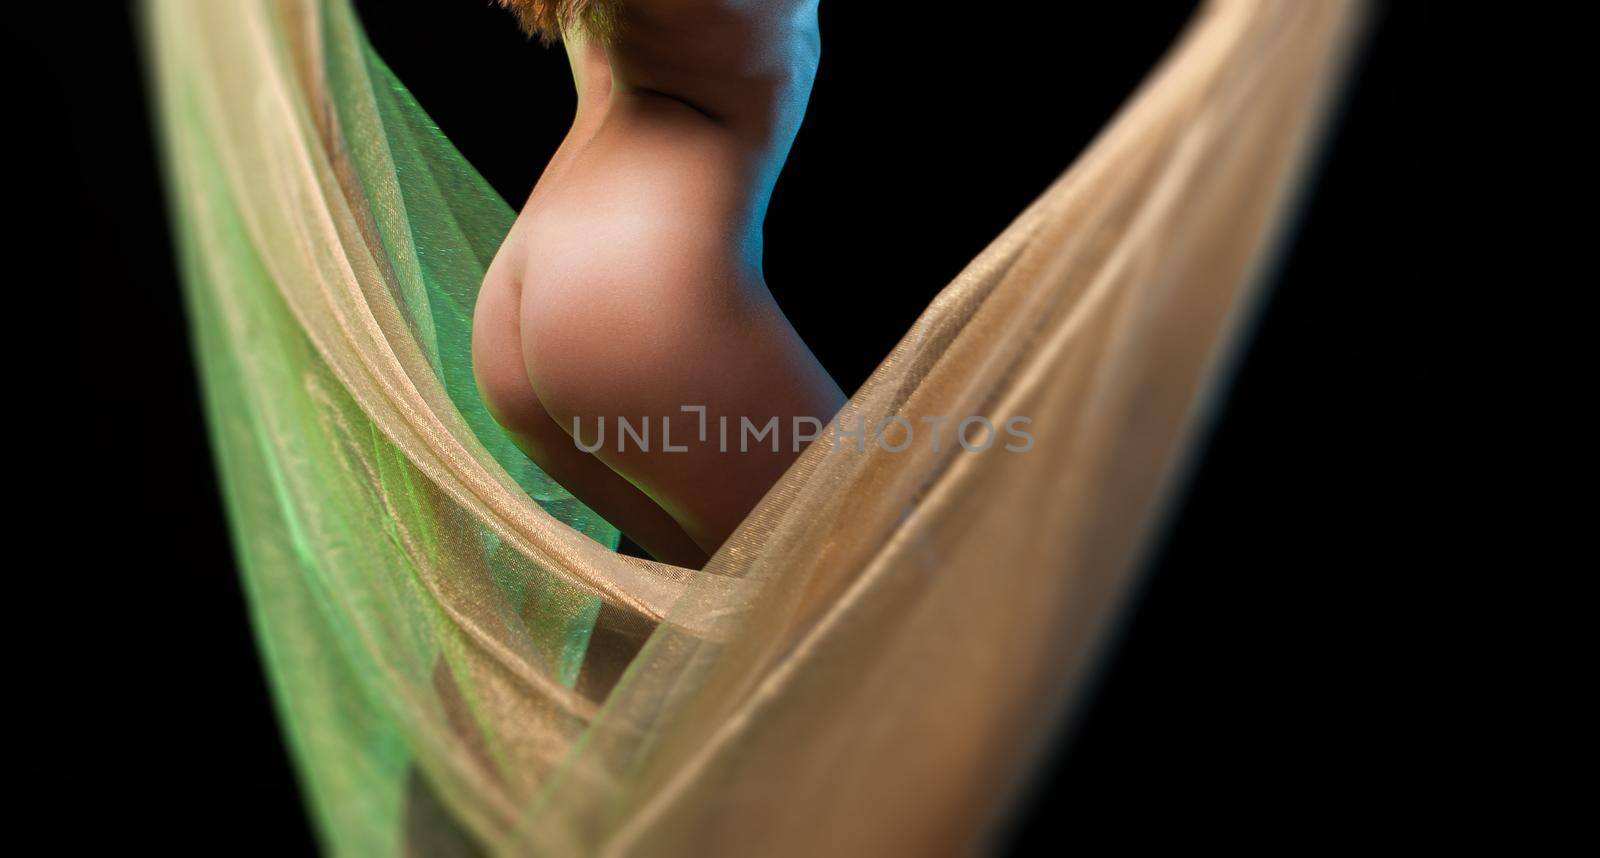 Nude woman posing in studio with a golden shawl by palinchak